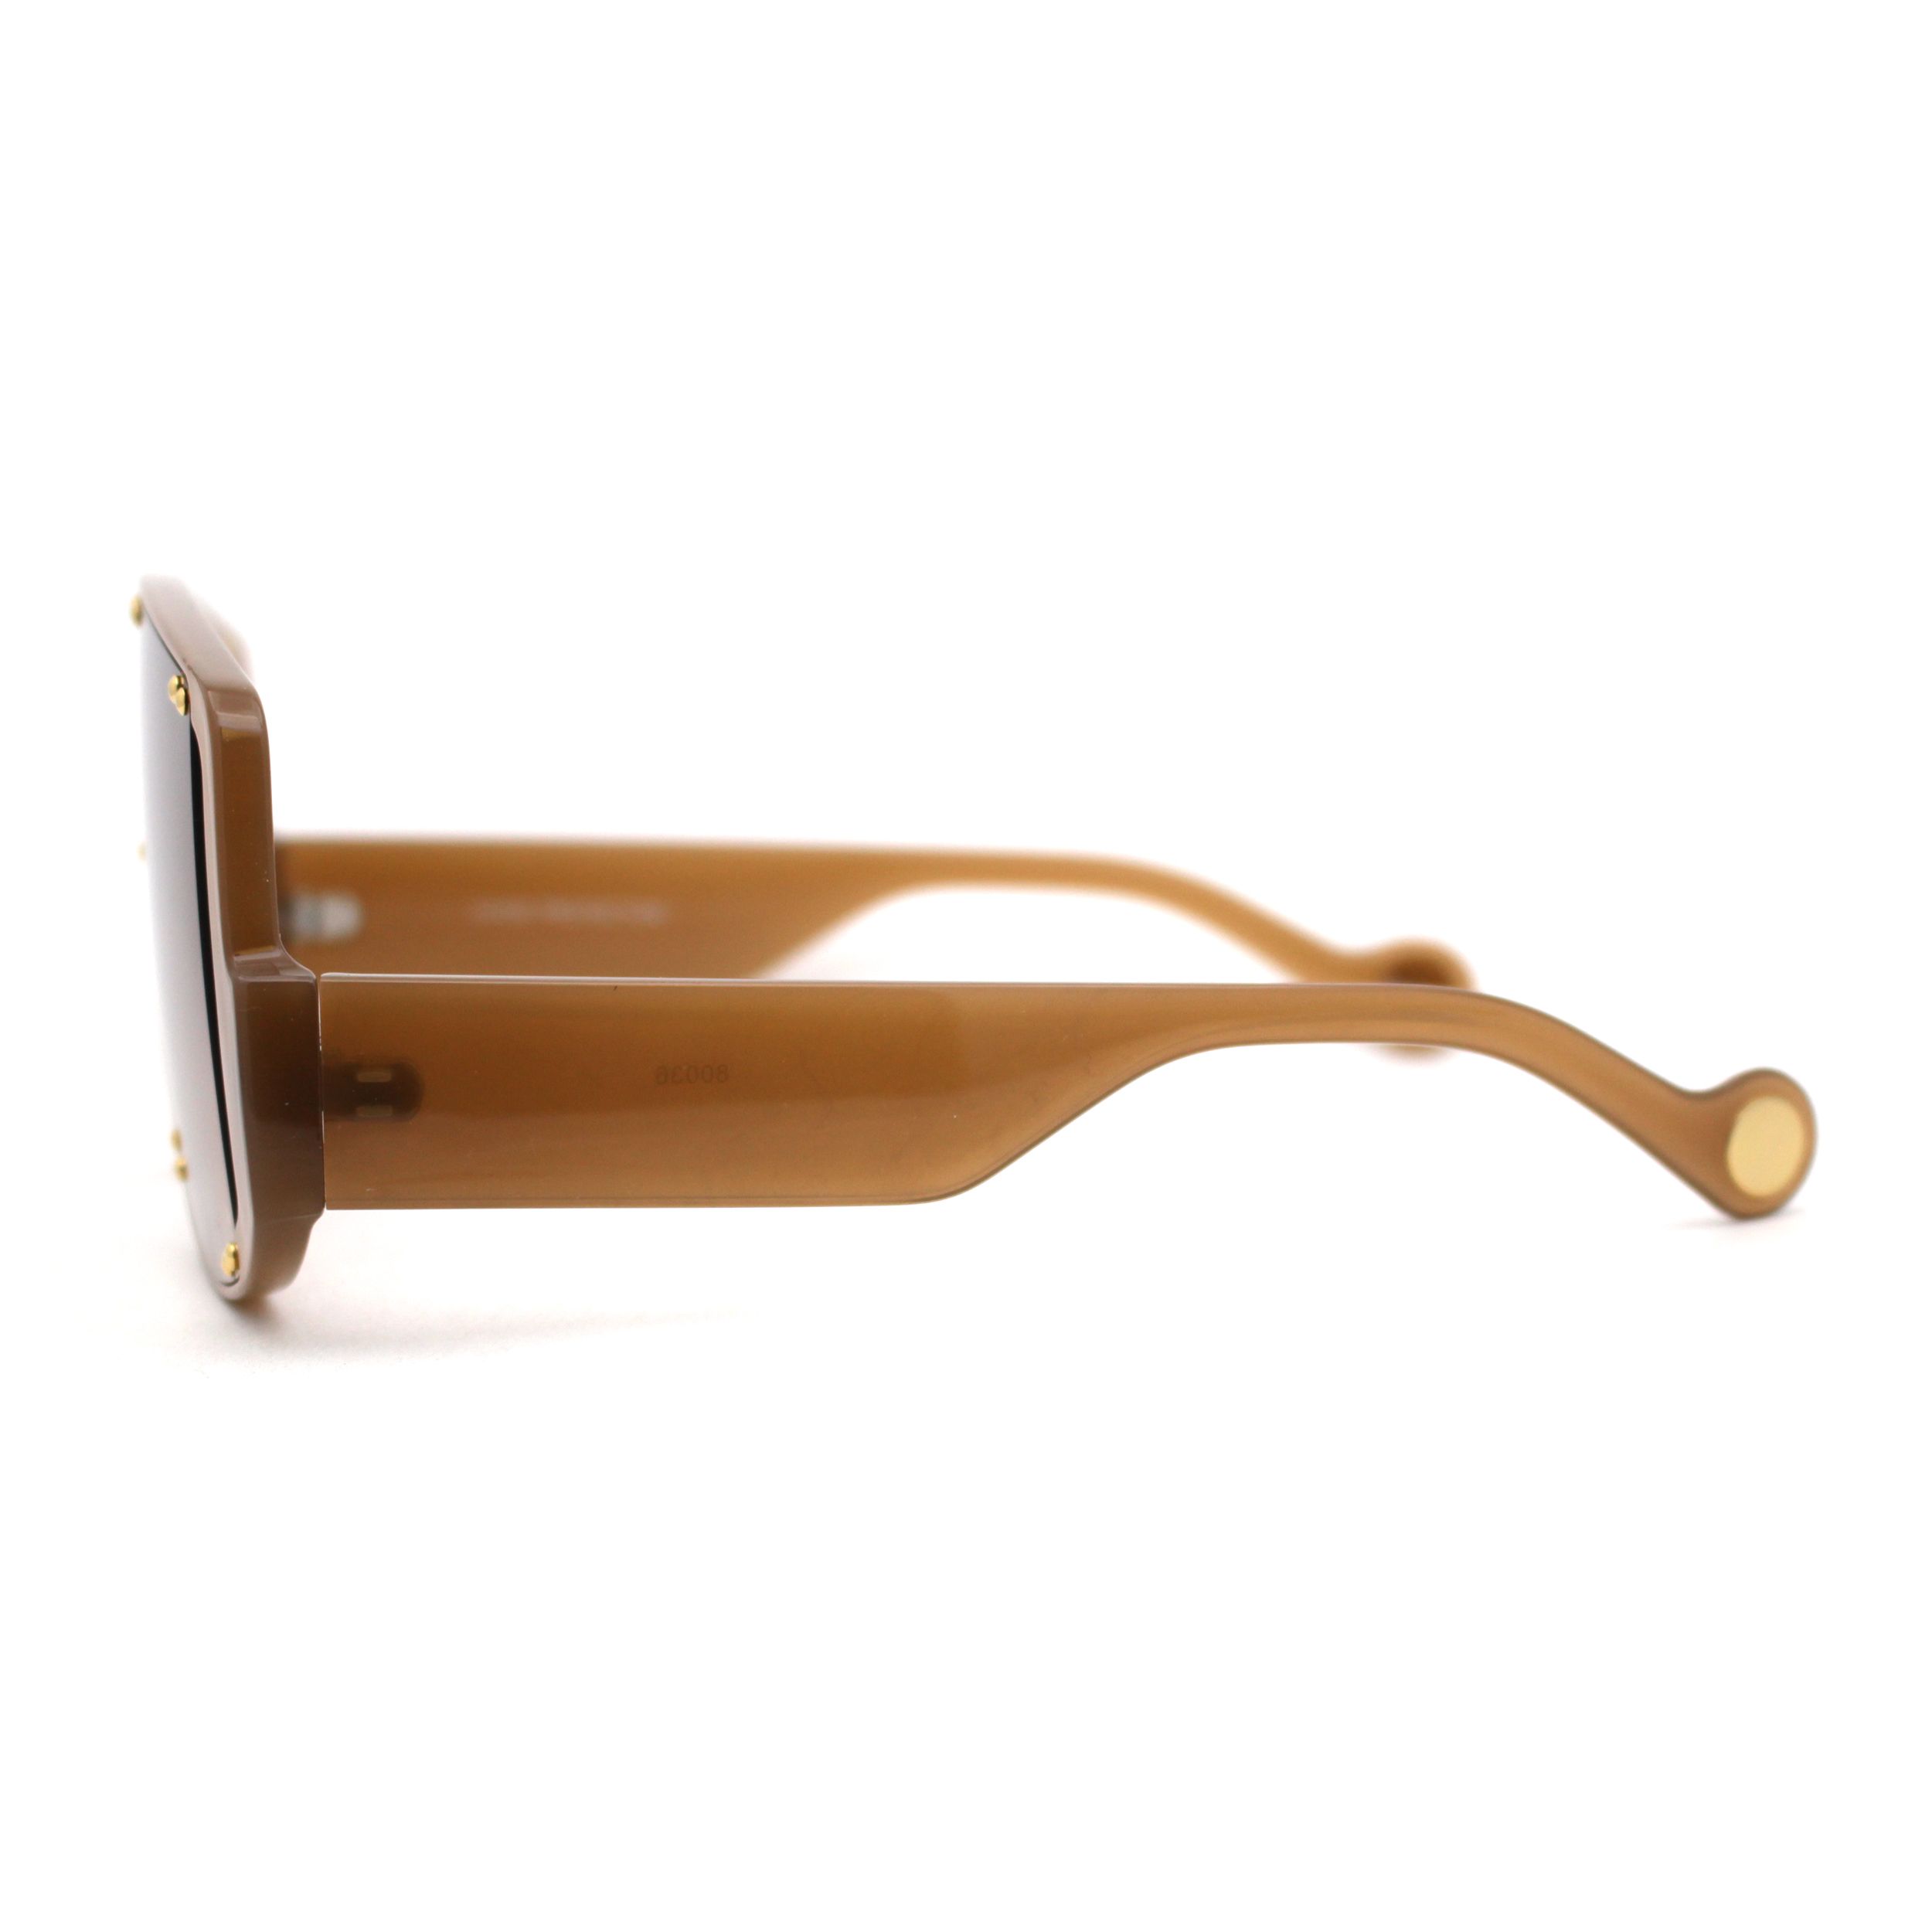 Multi Panel Shield Drop Temple Plastic Curved Top Racer Sunglasses All Brown - image 3 of 4